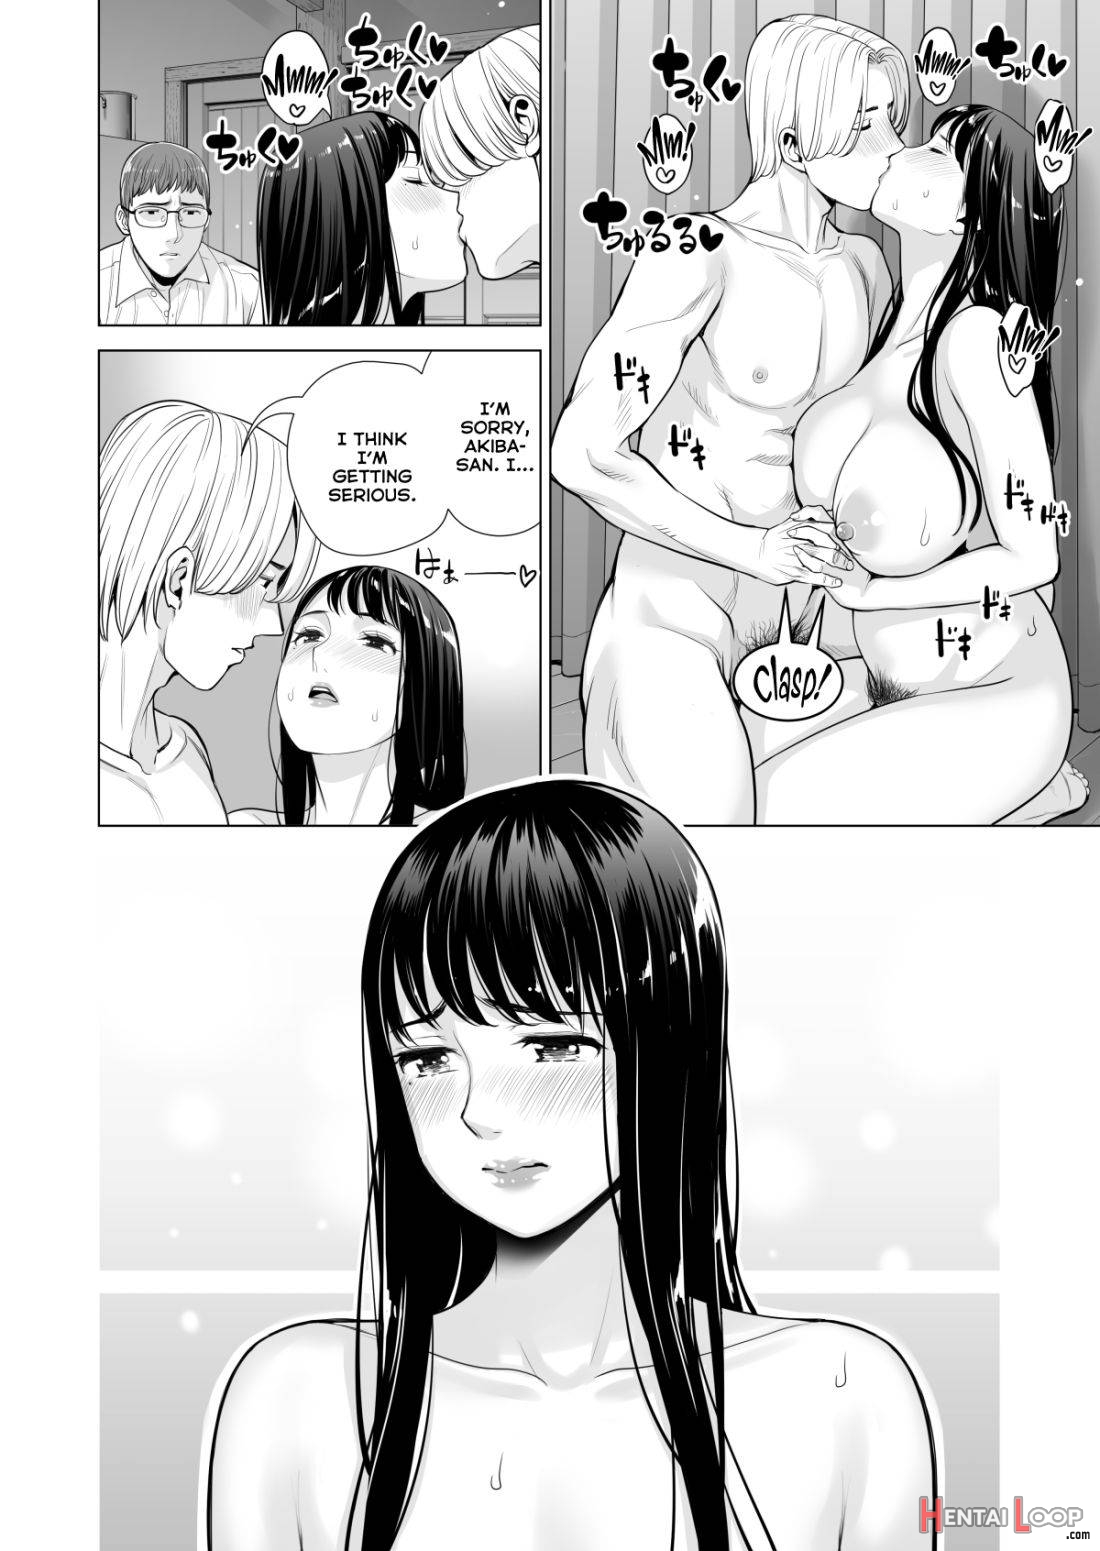 Tsukiyo no Midare Zake (Kouhen) Moonlit Intoxication ~ A Housewife Stolen by a Coworker Besides her Blackout Drunk Husband ~ Chapter 2 page 68